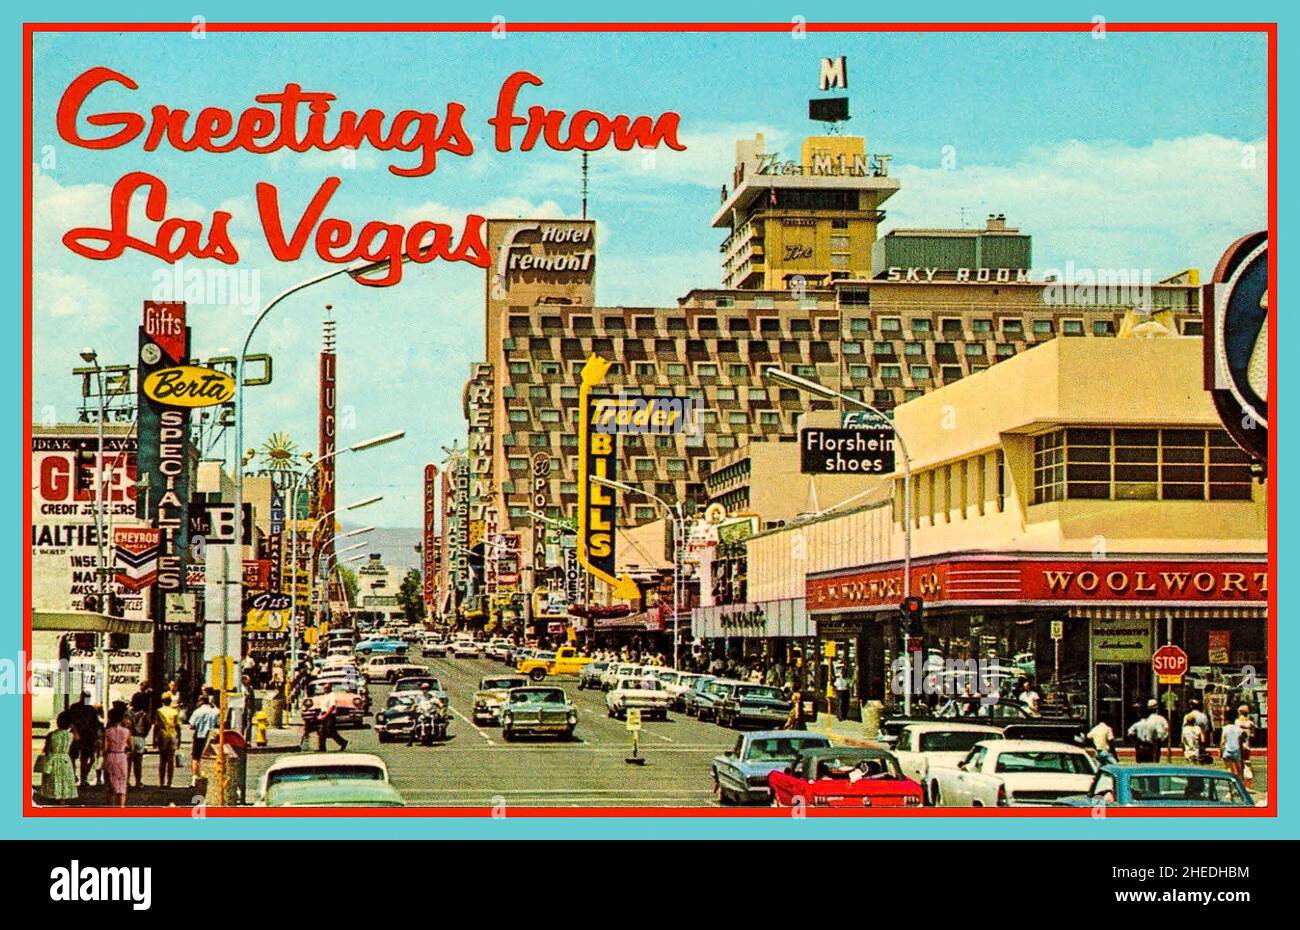 Las Vegas 1950s retro vintage postcard 1950s Fremont Street in sunshine daylight featuring Fremont Hotel and Woolworth store with 1950s American cars Las Vegas Nevada USA ‘Greetings from Las Vegas’ Stock Photo